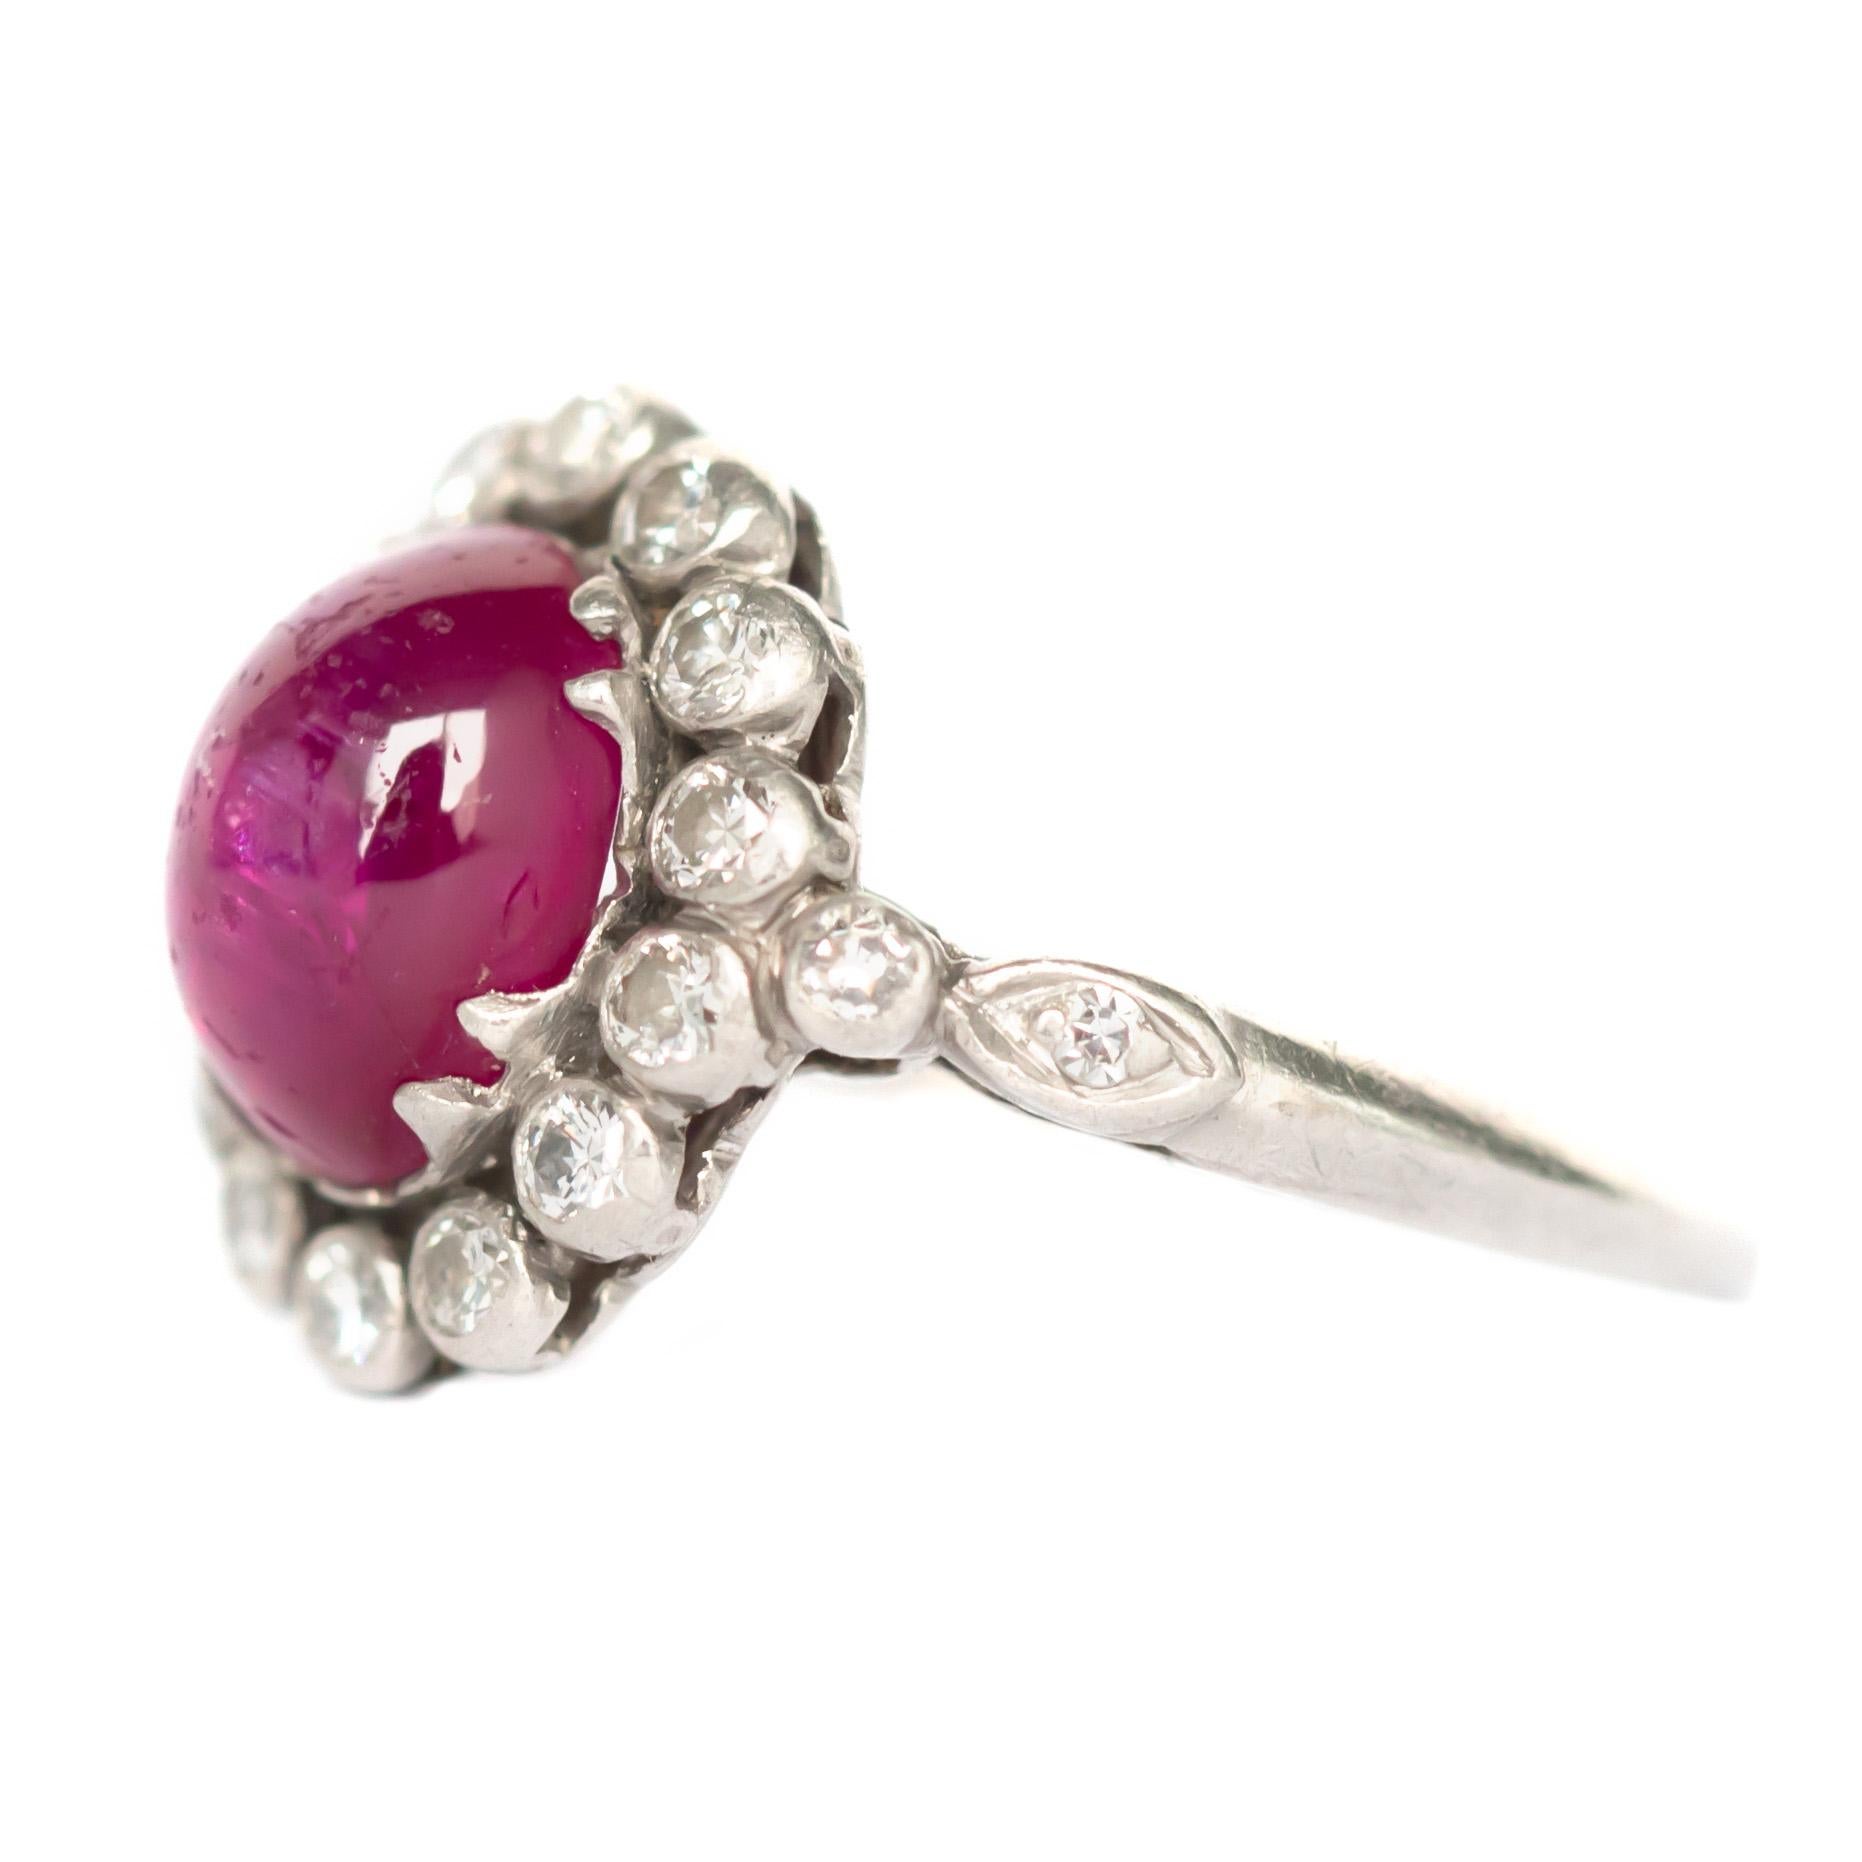 Ring Size: 6.95
Metal Type: Platinum
Weight: 4.2 grams

Color Stone Details: 
Type: Ruby
Shape: Natural Unheated
Carat Weight: ~3.50 carat

Side Stone Details: 
Shape: Old European 
Total Carat Weight: .40 carat total weight
Color: G
Clarity: